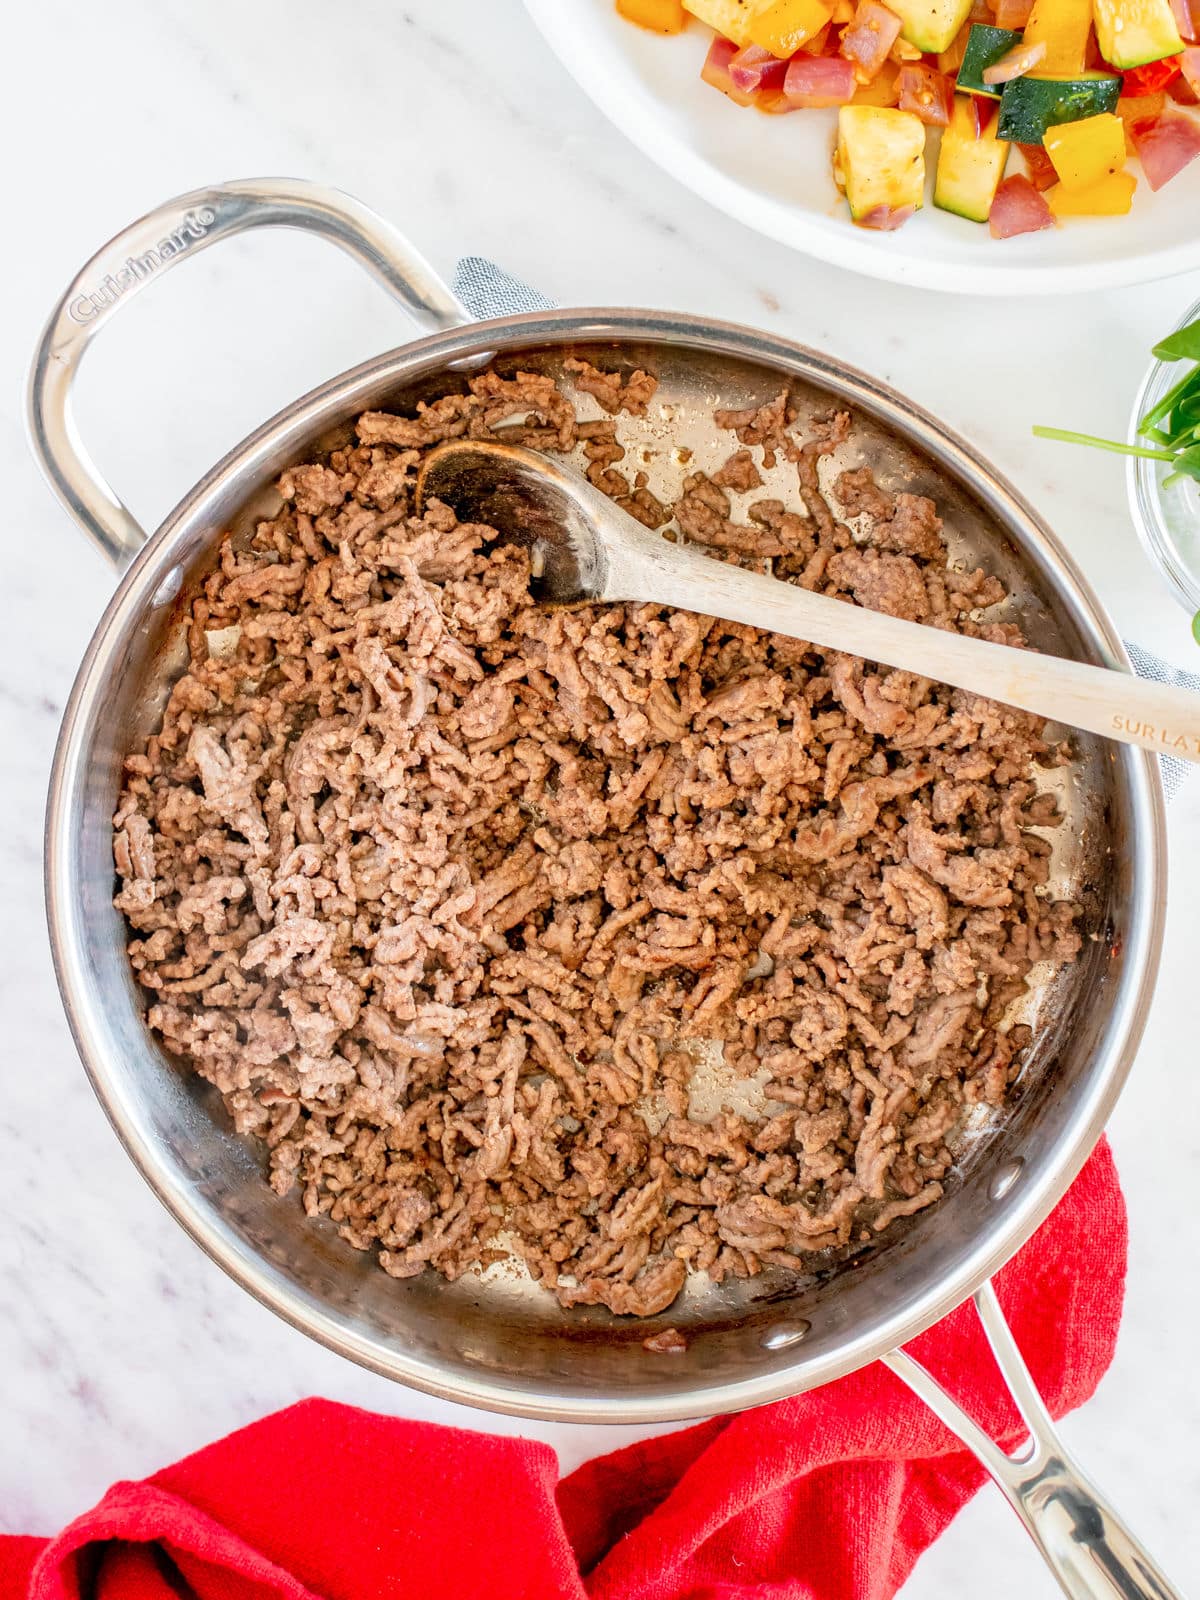 Cooked ground beef in a stainless steel pan with a wooden spoon.